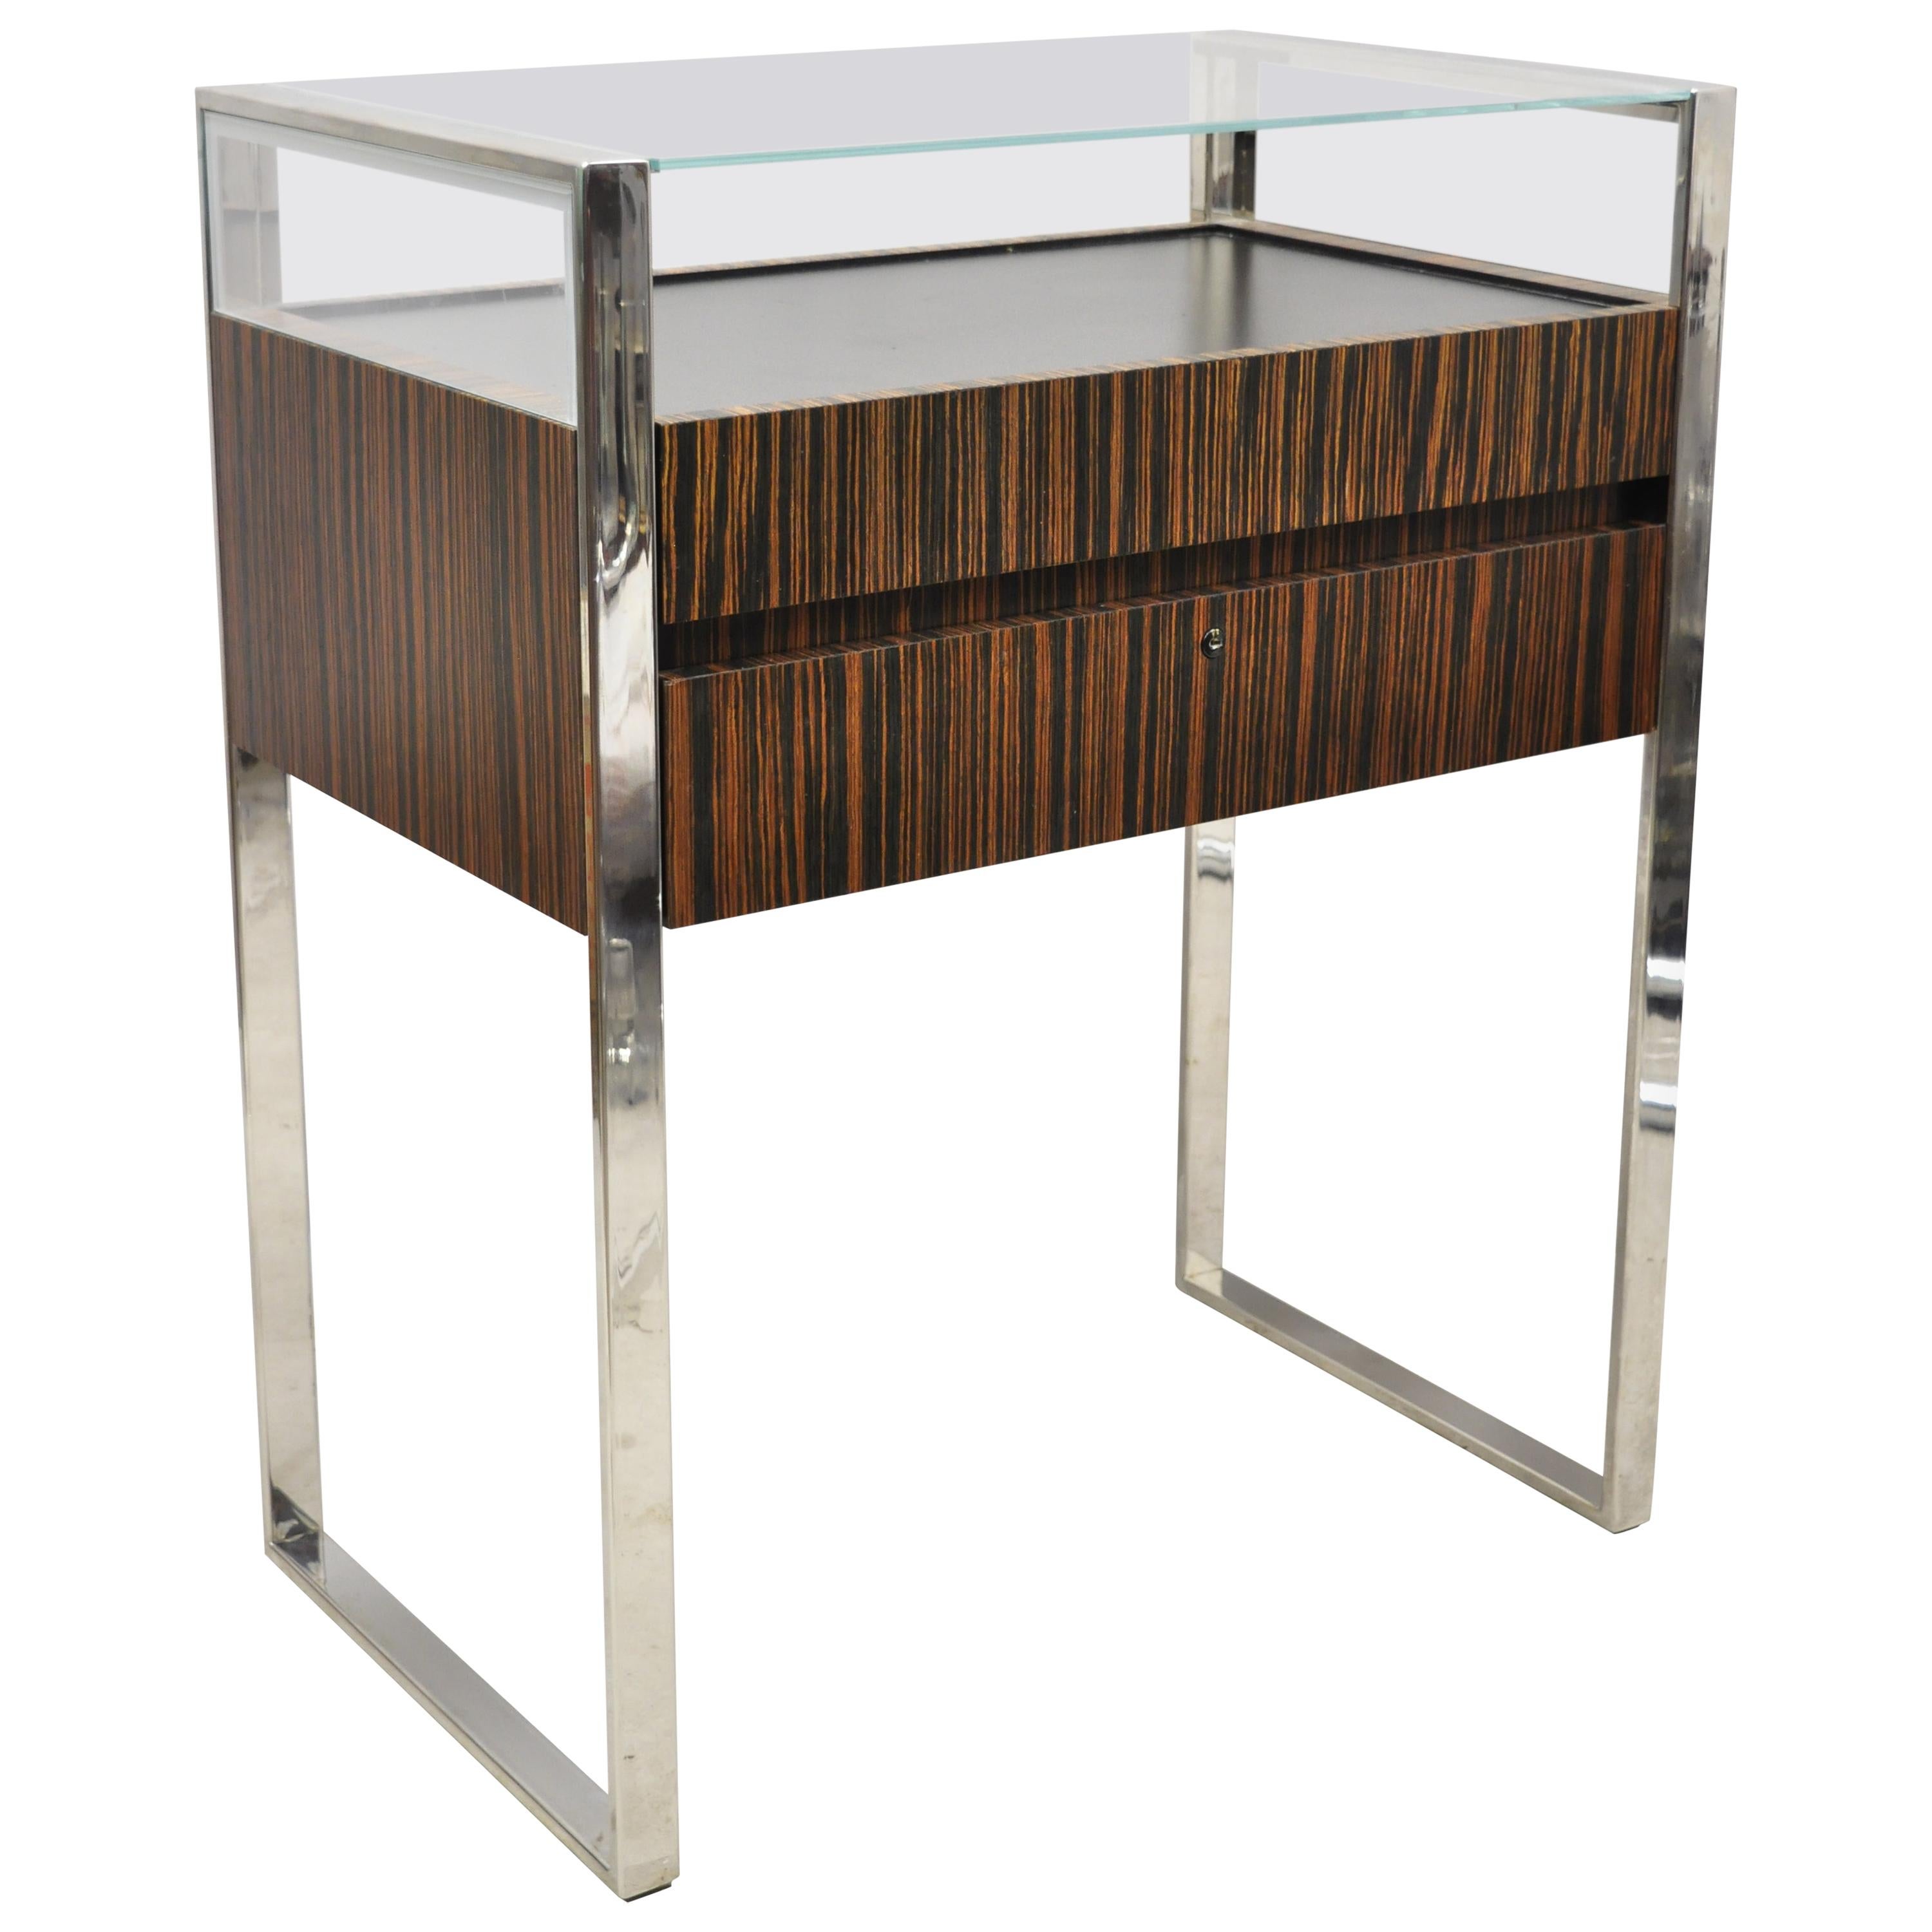 Modern Zebra Wood Chrome Glass Jewelry Closet Display Counter Case with Drawer For Sale